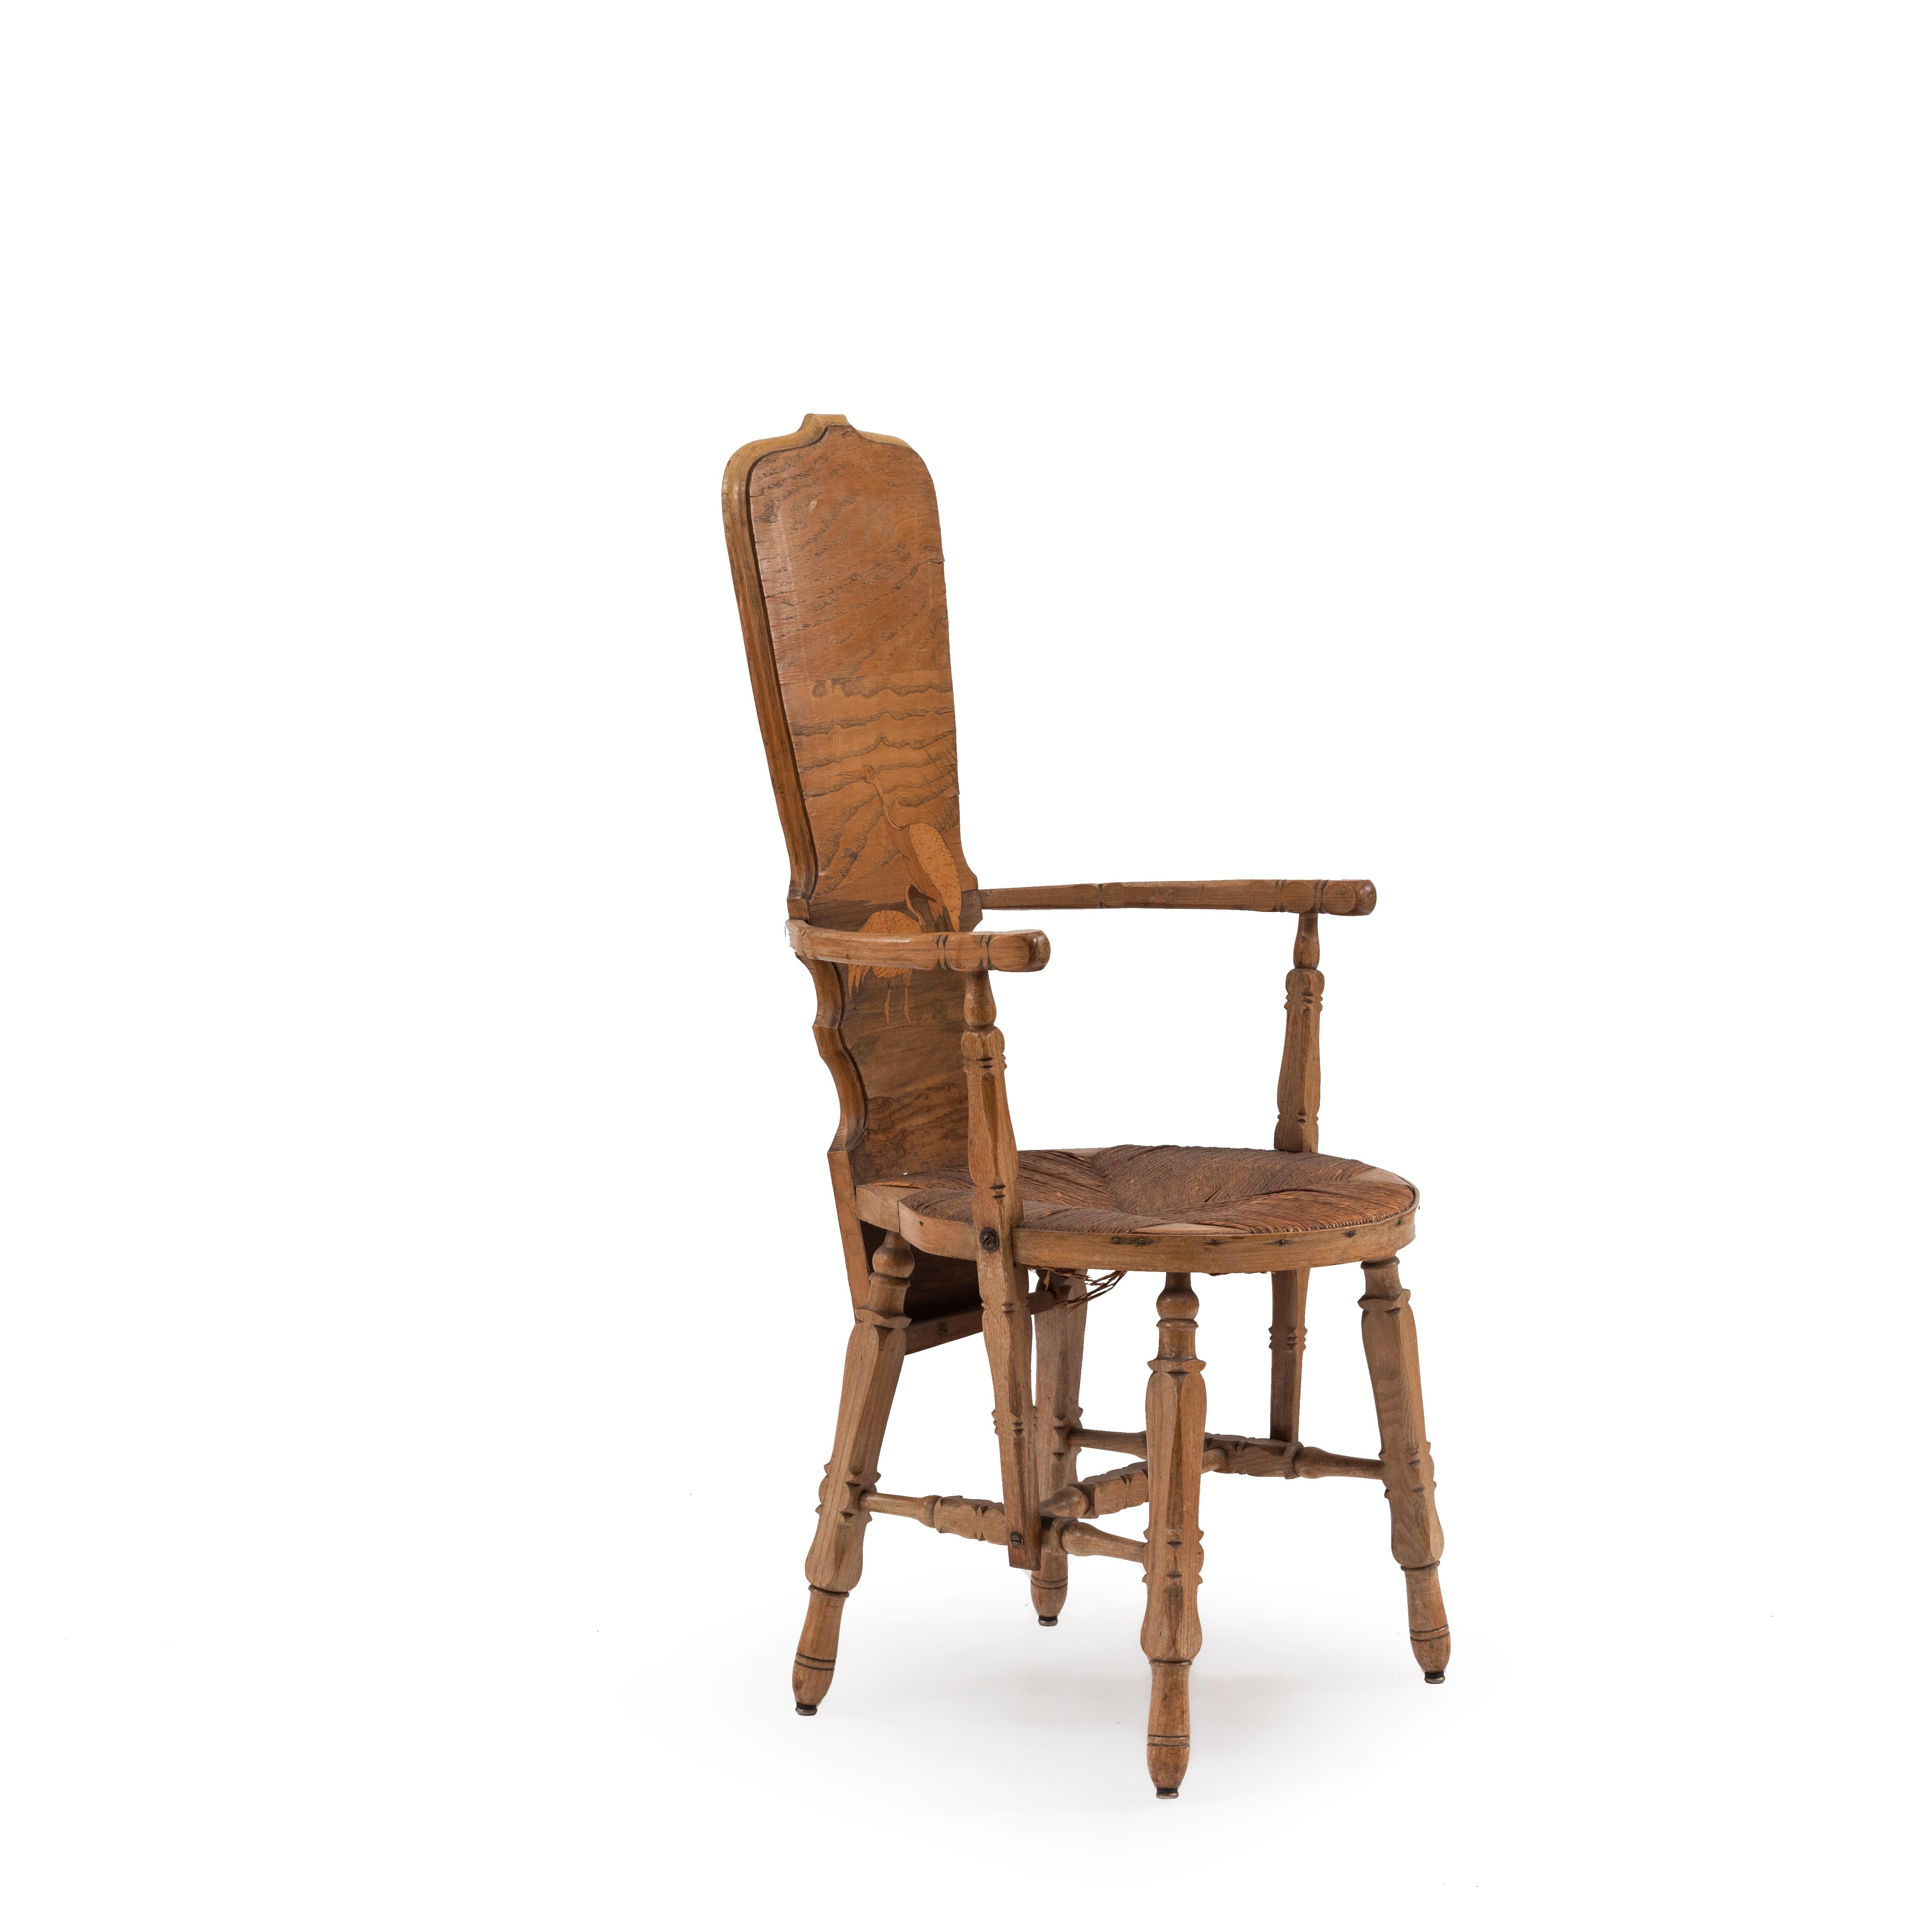 Inlay French Provincial 19th Century Inlaid High Back Armchair with Rustic Rush Seat For Sale